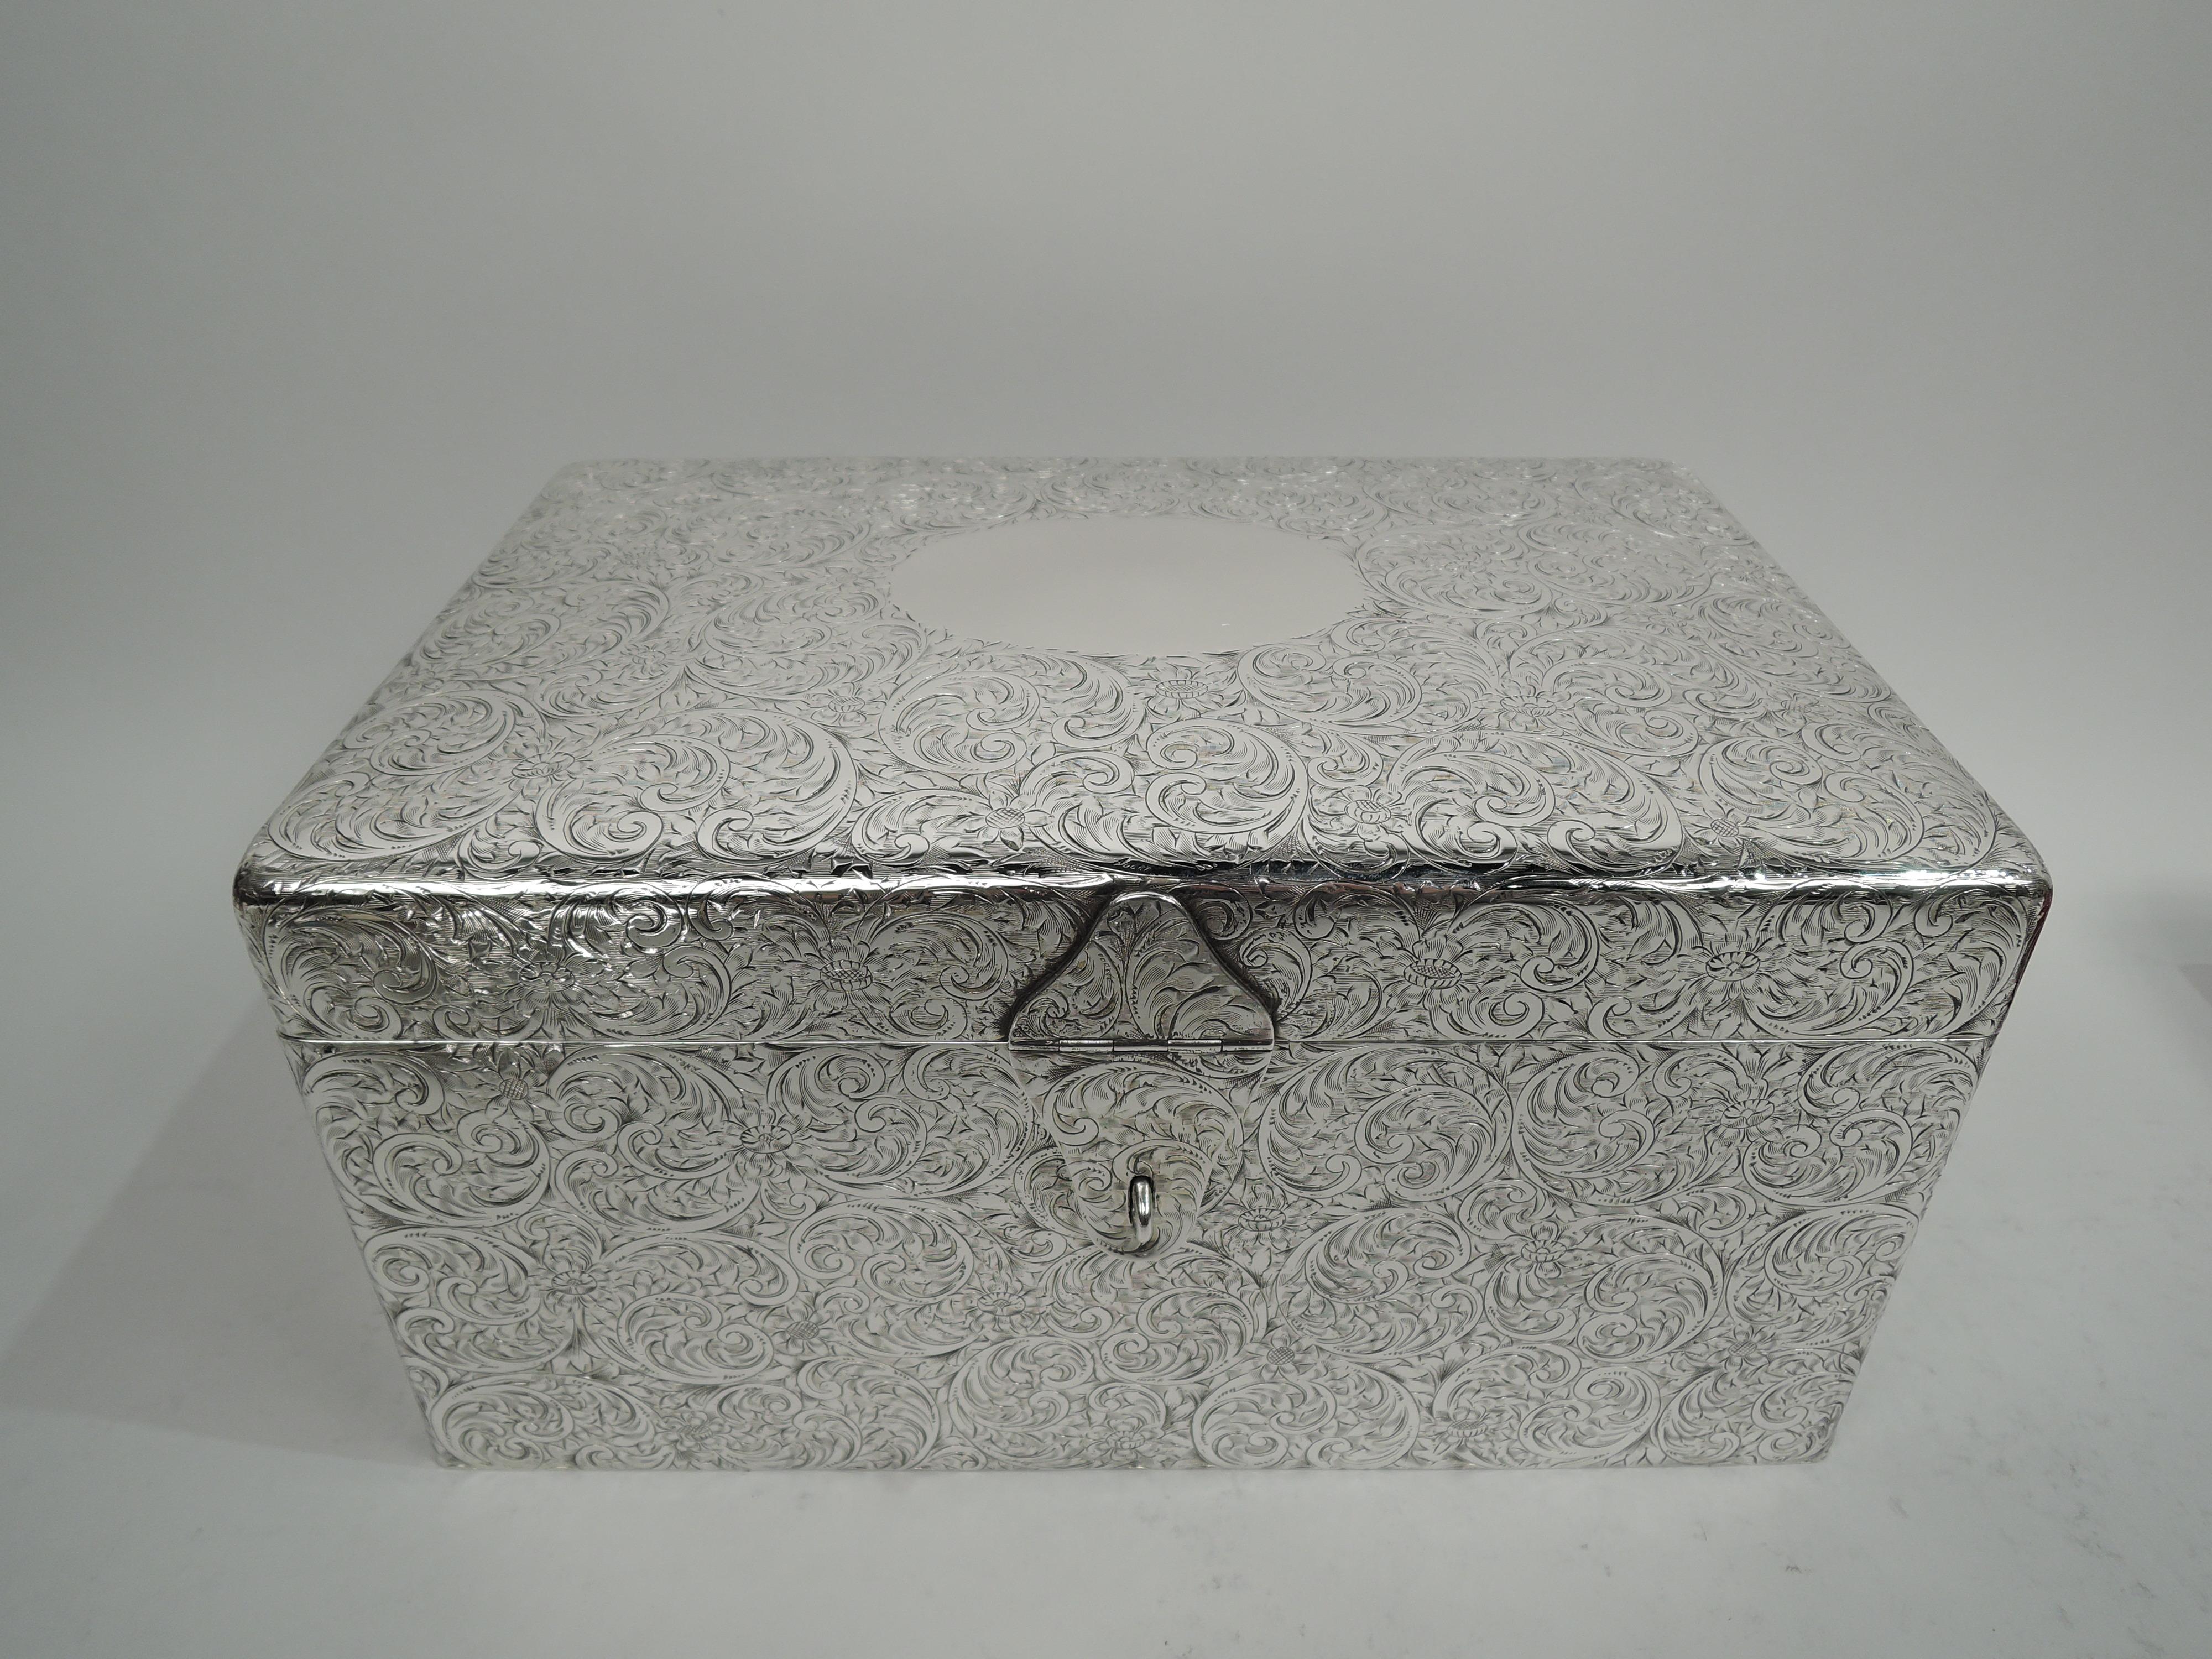 Large American Art Nouveau Sterling Silver Jewel Casket In Good Condition For Sale In New York, NY